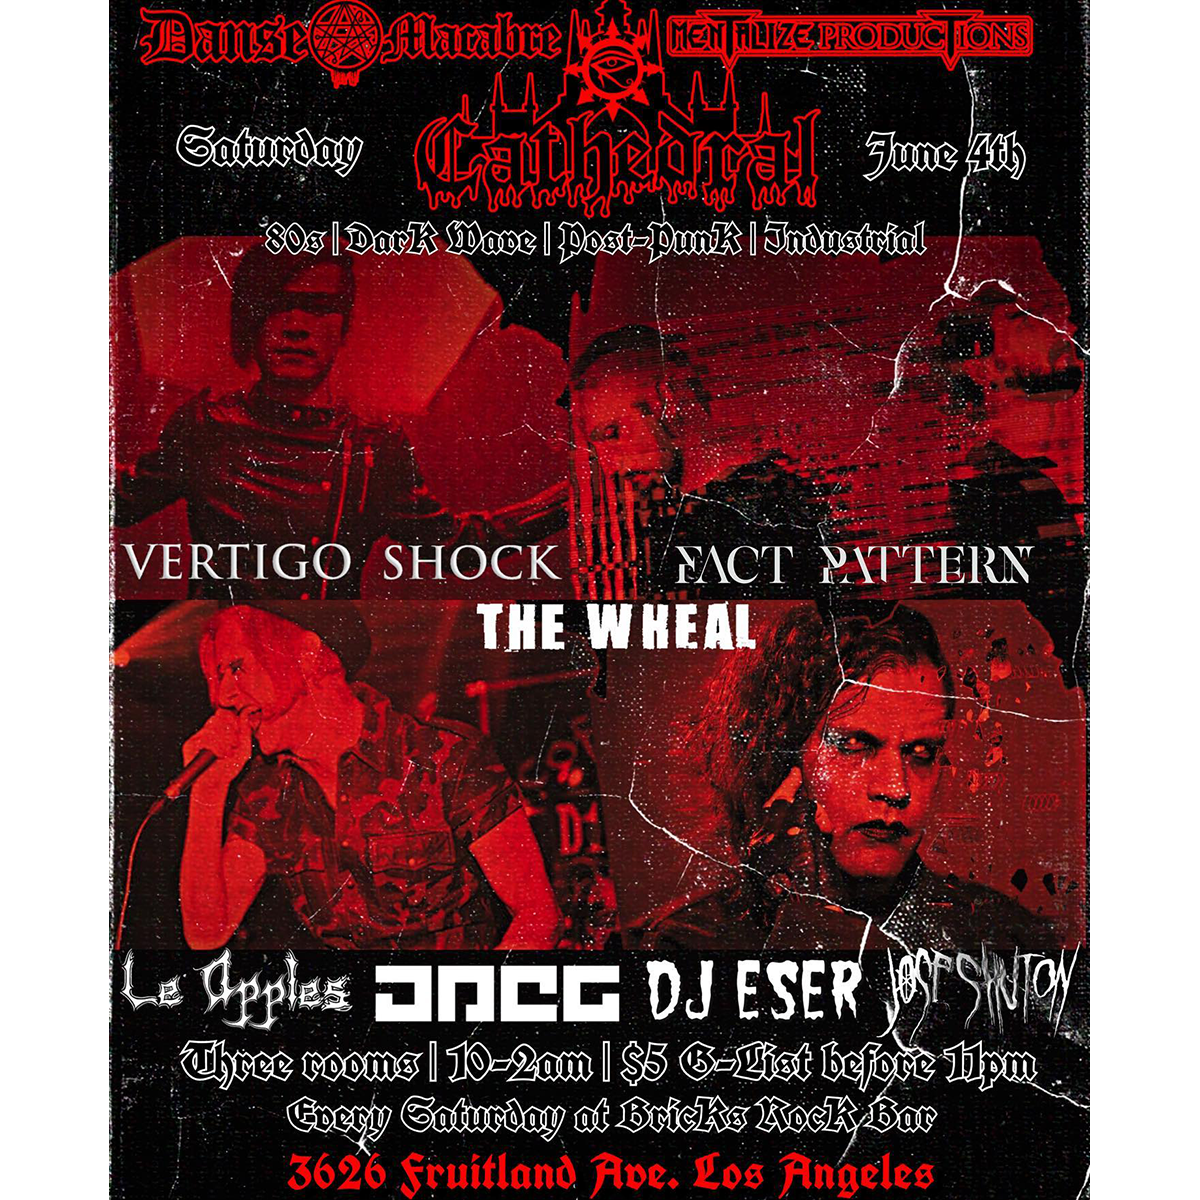 Danse Macabre presents Cathedral Nightclub with Vertigo Shock, Fact Pattern, and The Wheal, with DJs JPEG01, Le Apples, DJ Eser, and Jose Shuton at Bricks Rock Bar in Maywood, CA